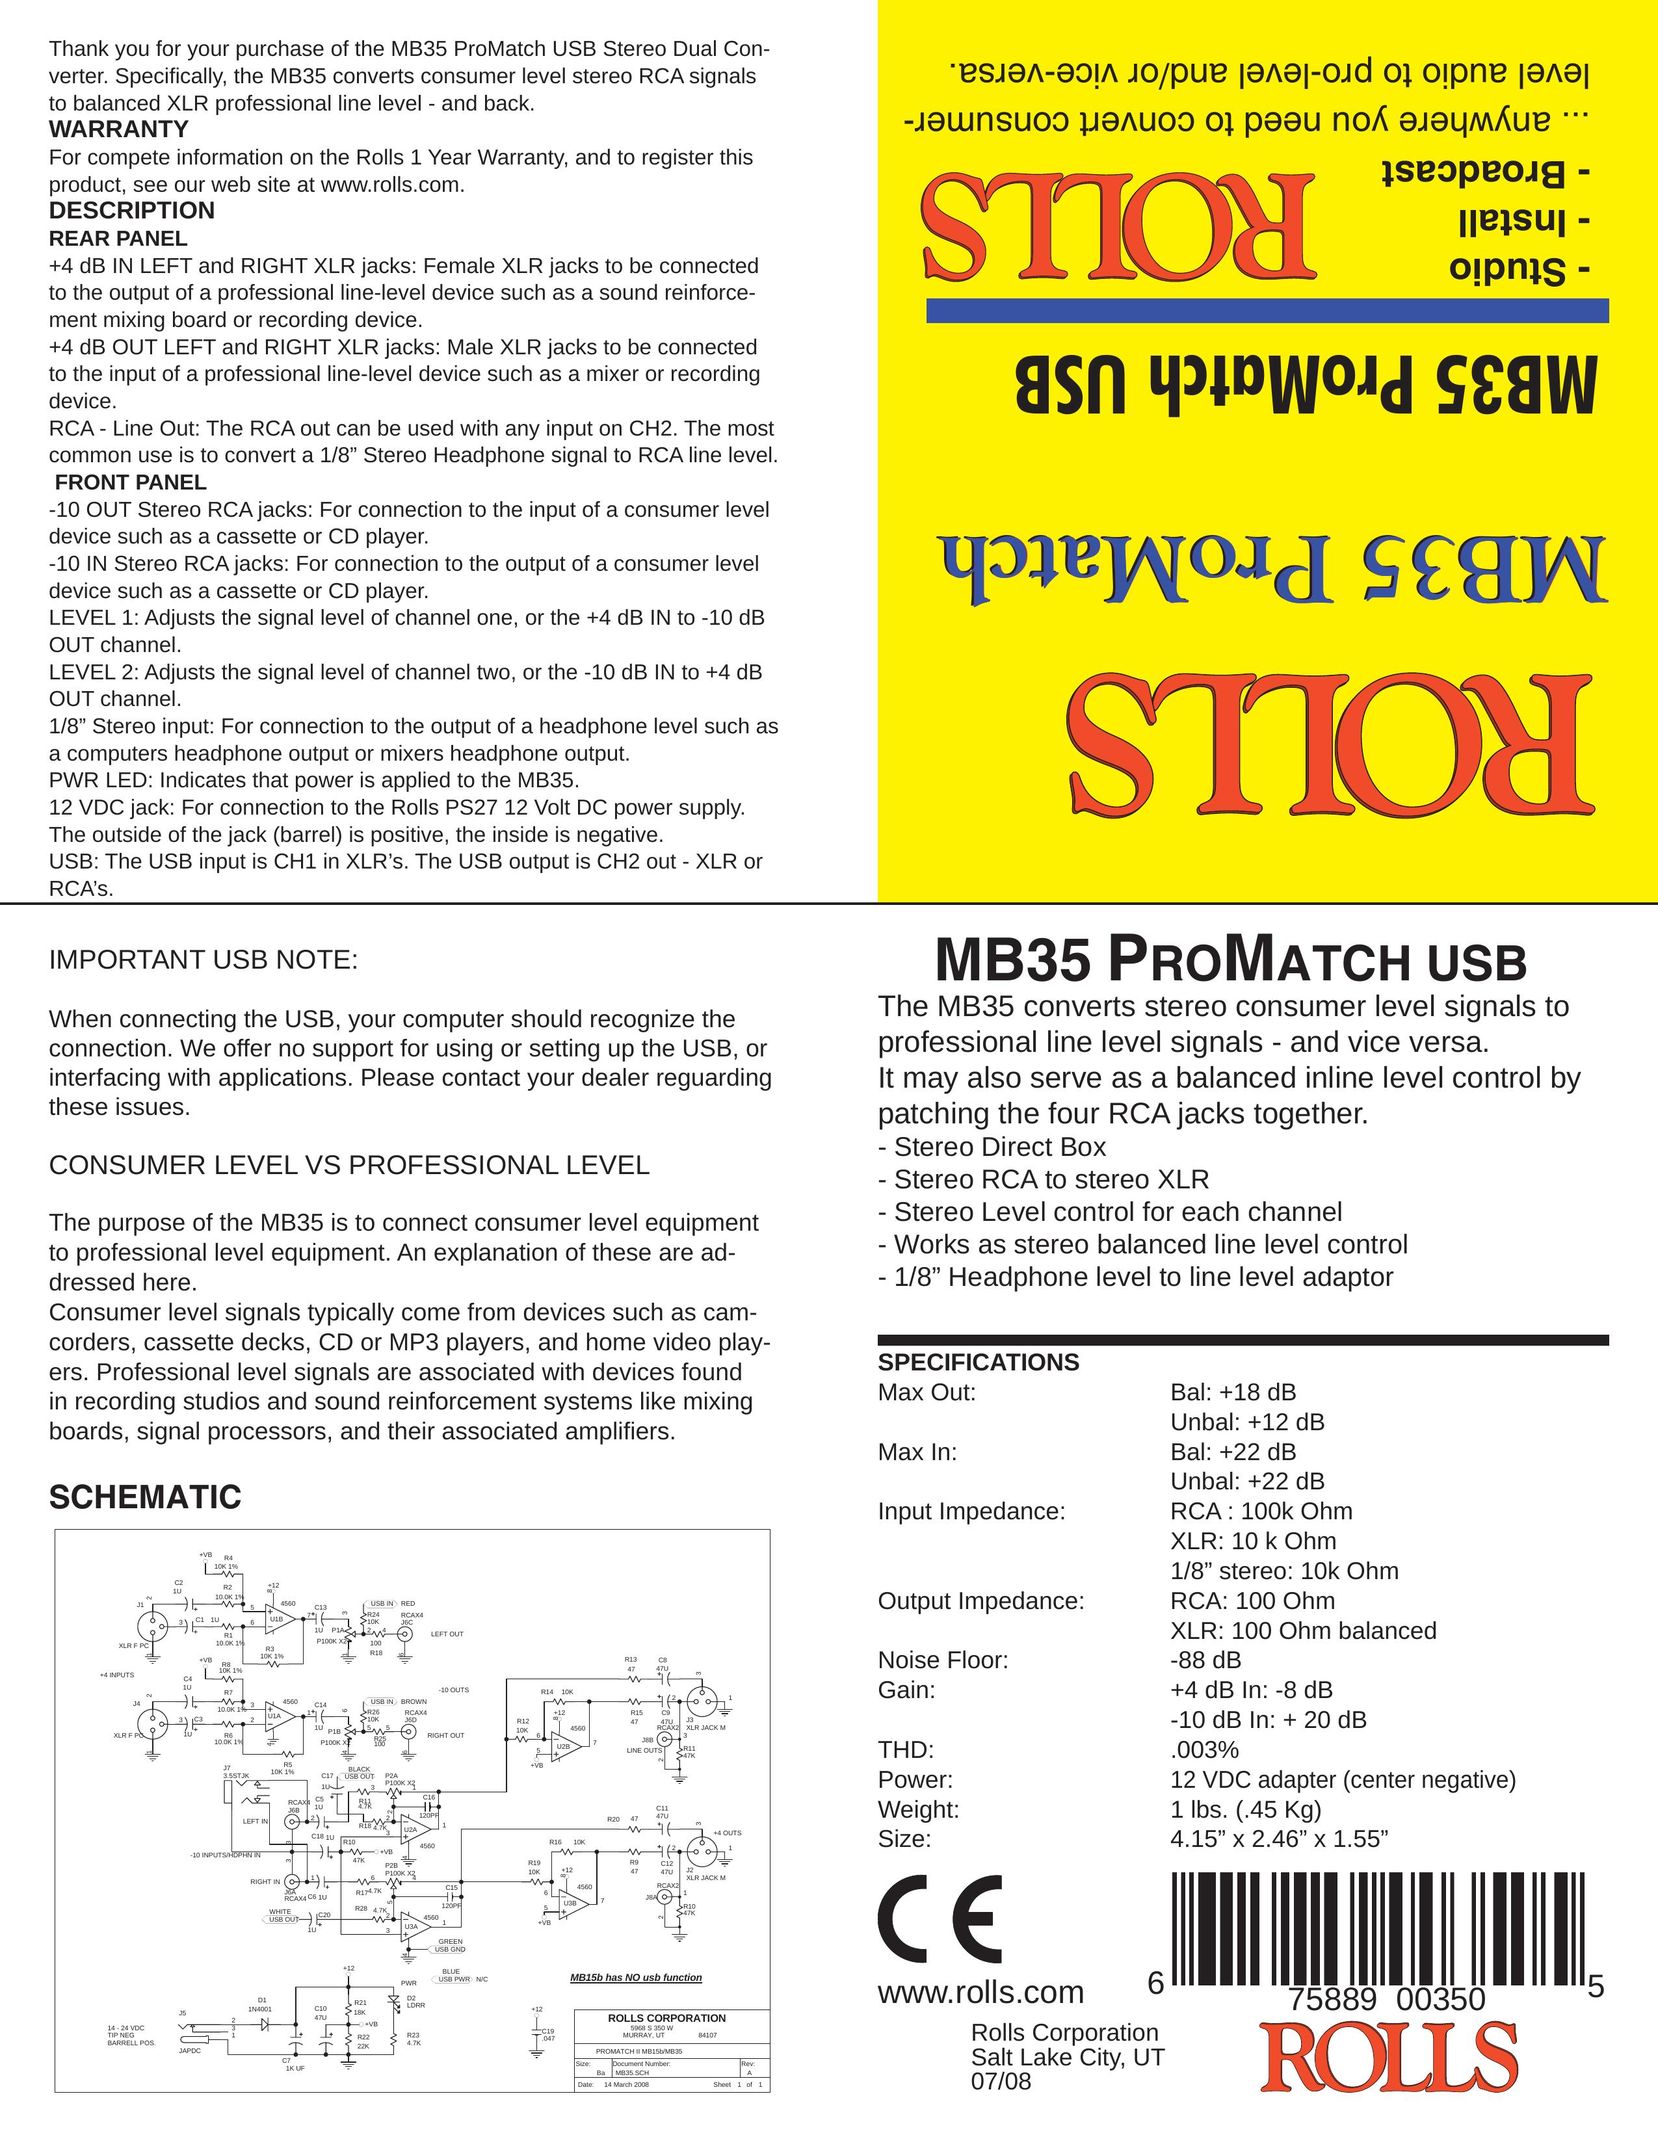 Rolls MB35 Stereo System User Manual